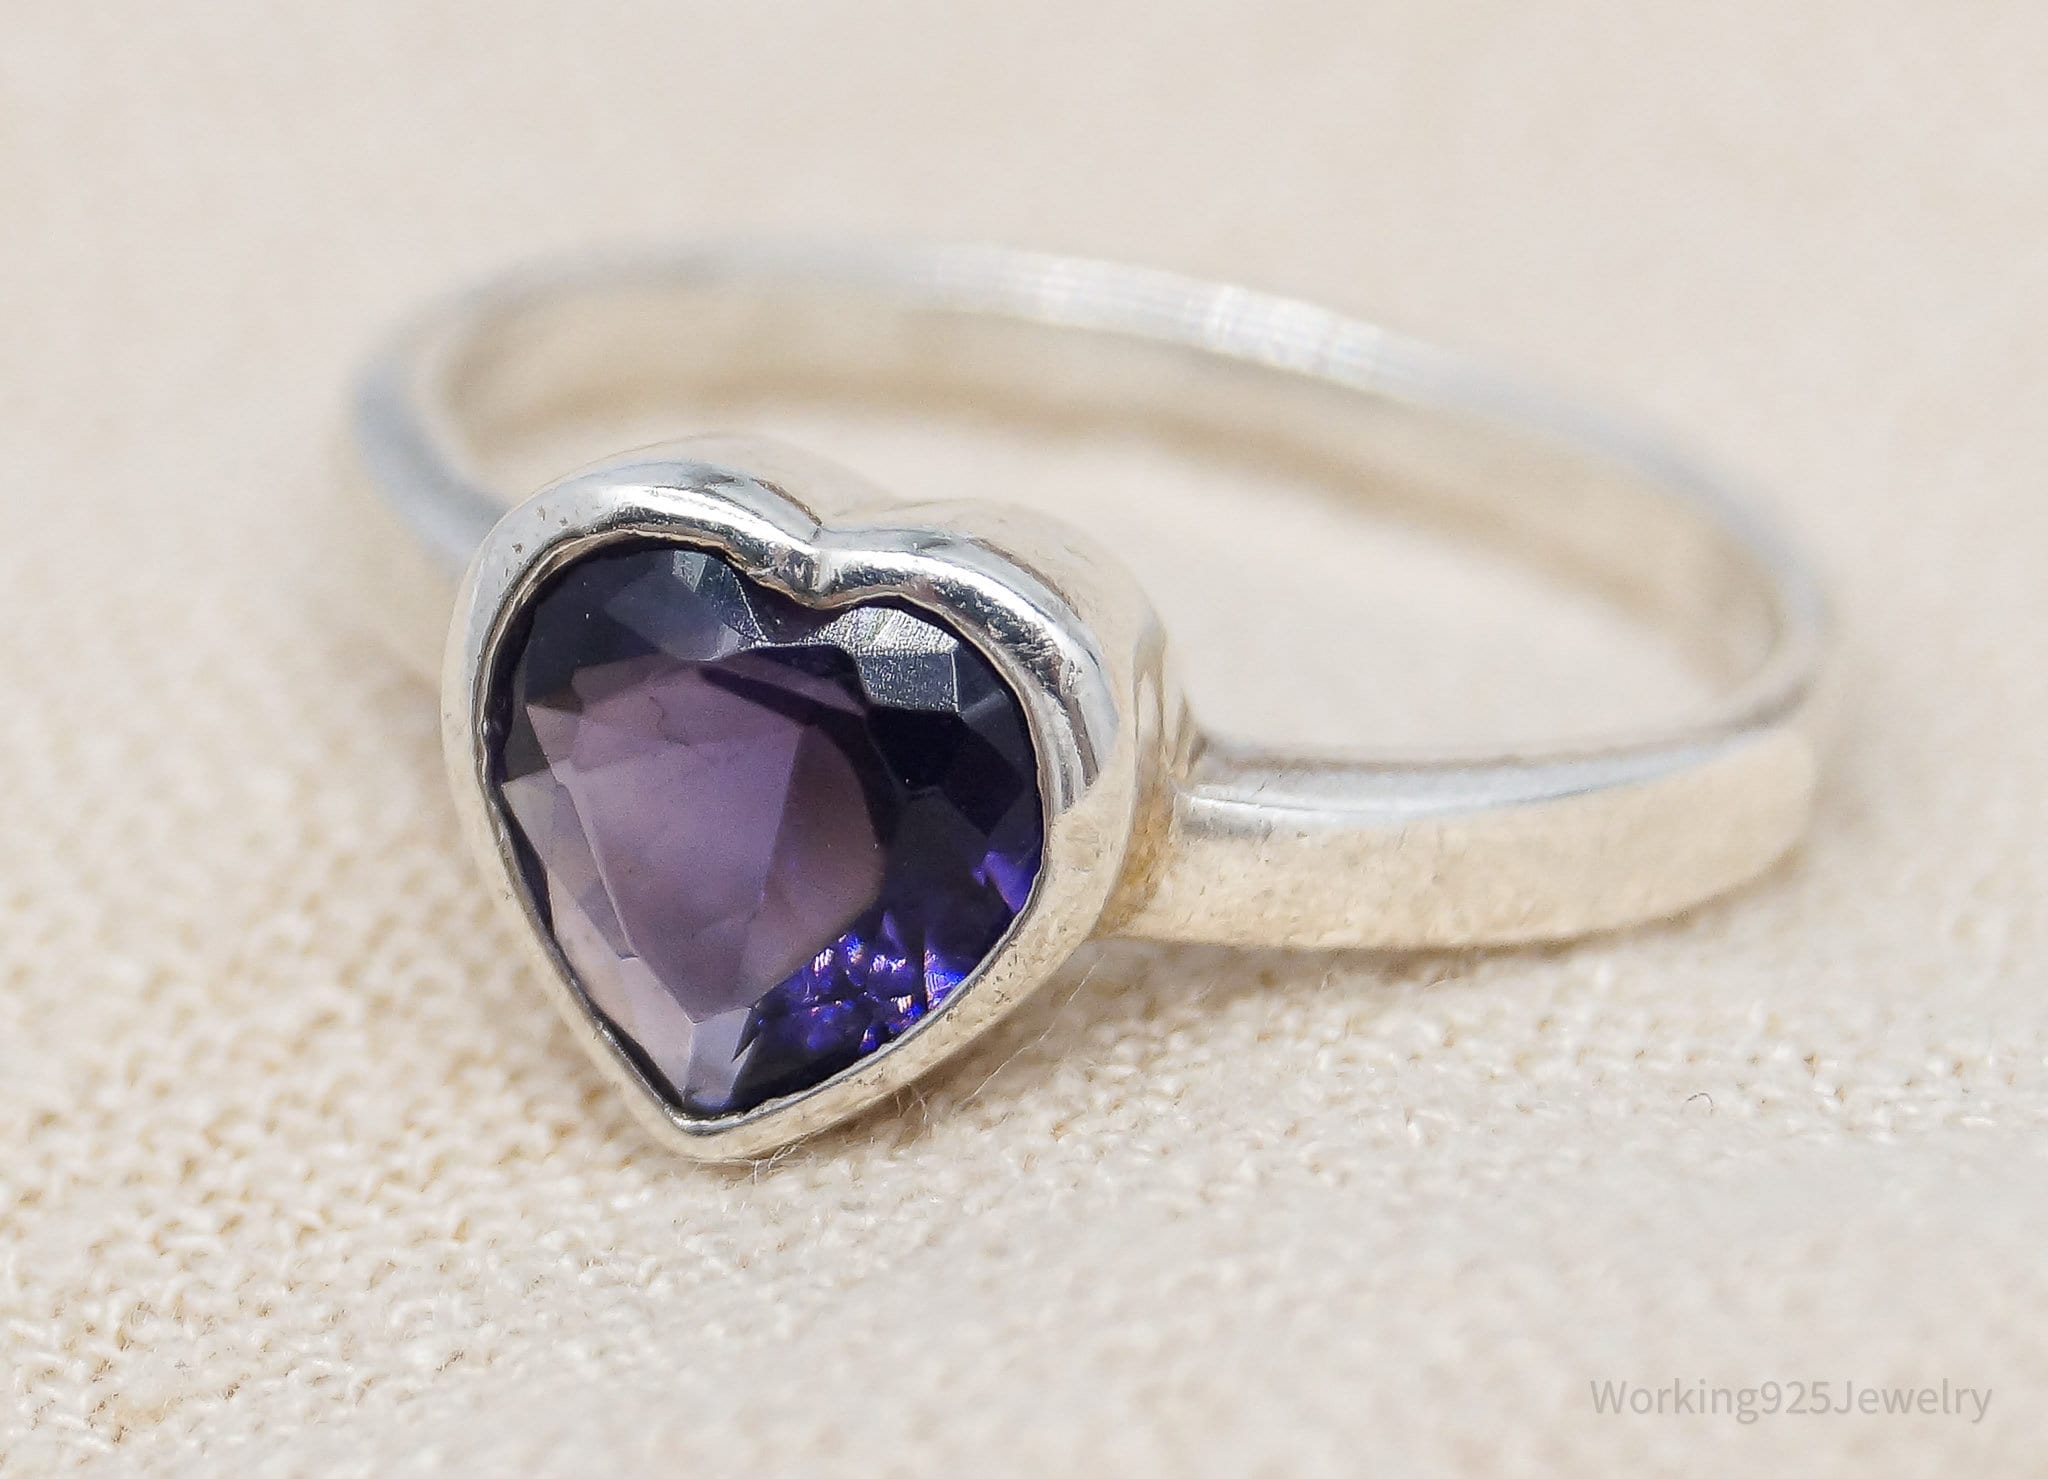 Vintage Faux Amethyst Heart Sterling Silver Ring - Size 6.75